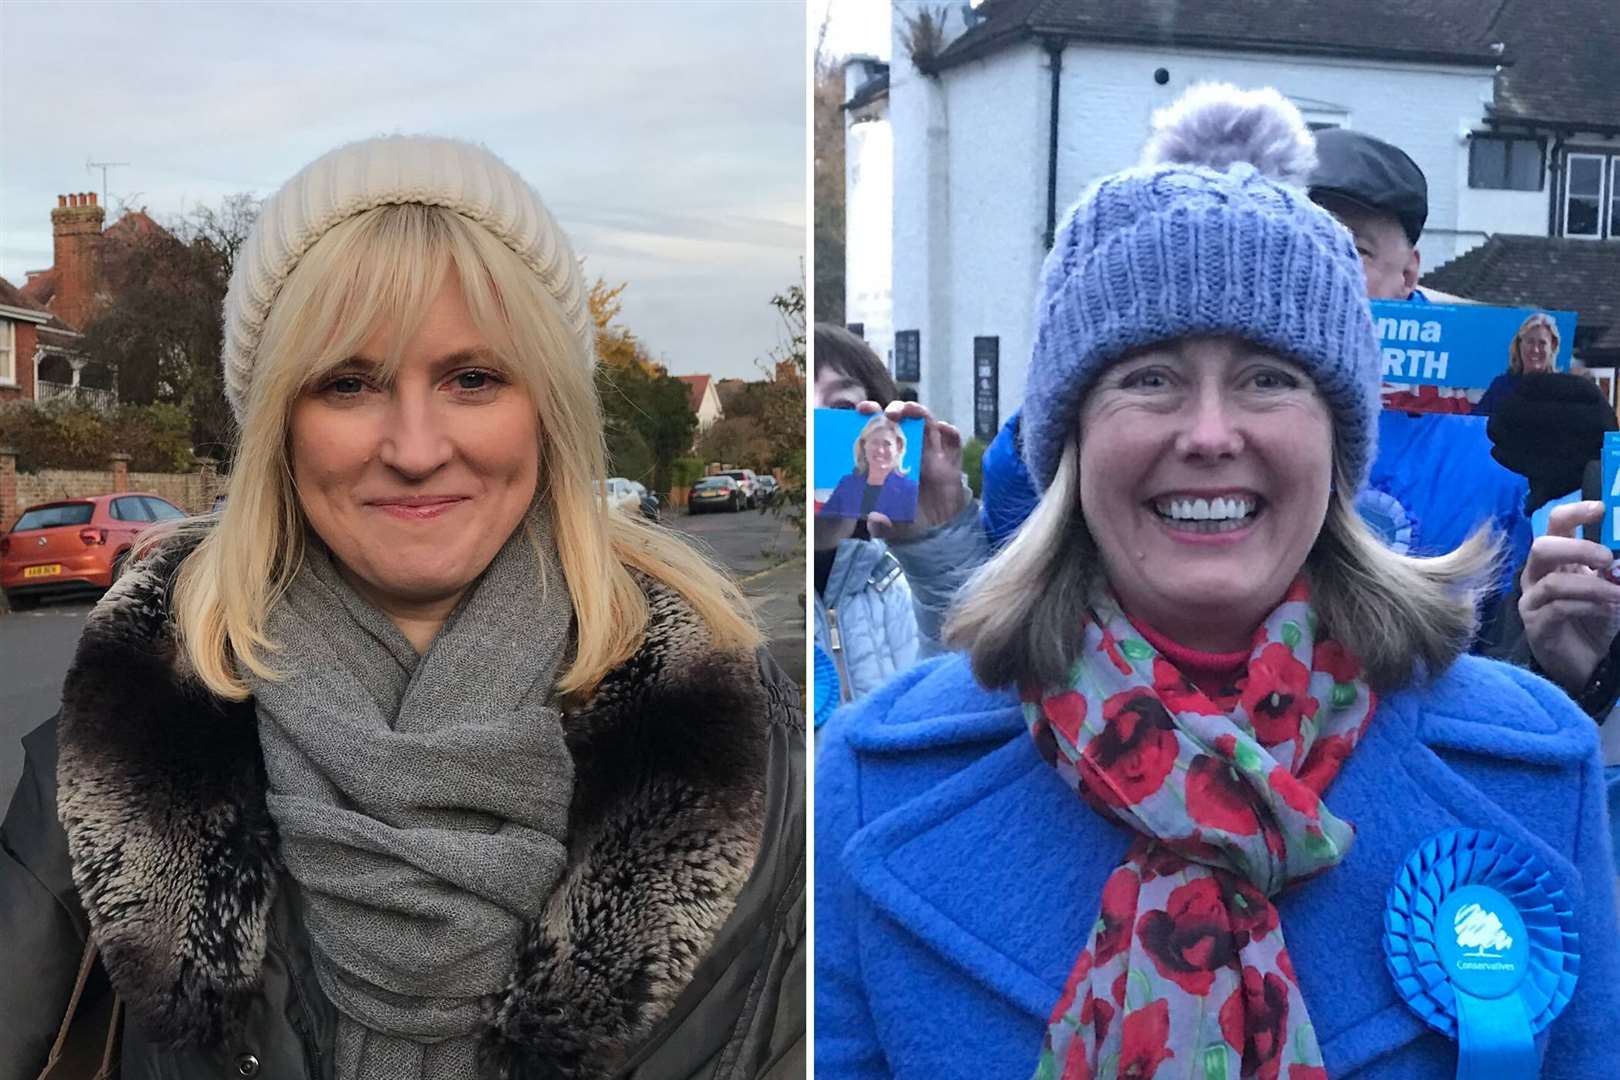 Rosie Duffield and Anna Firth have been braving the cold weather on the campaign trail in Canterbury